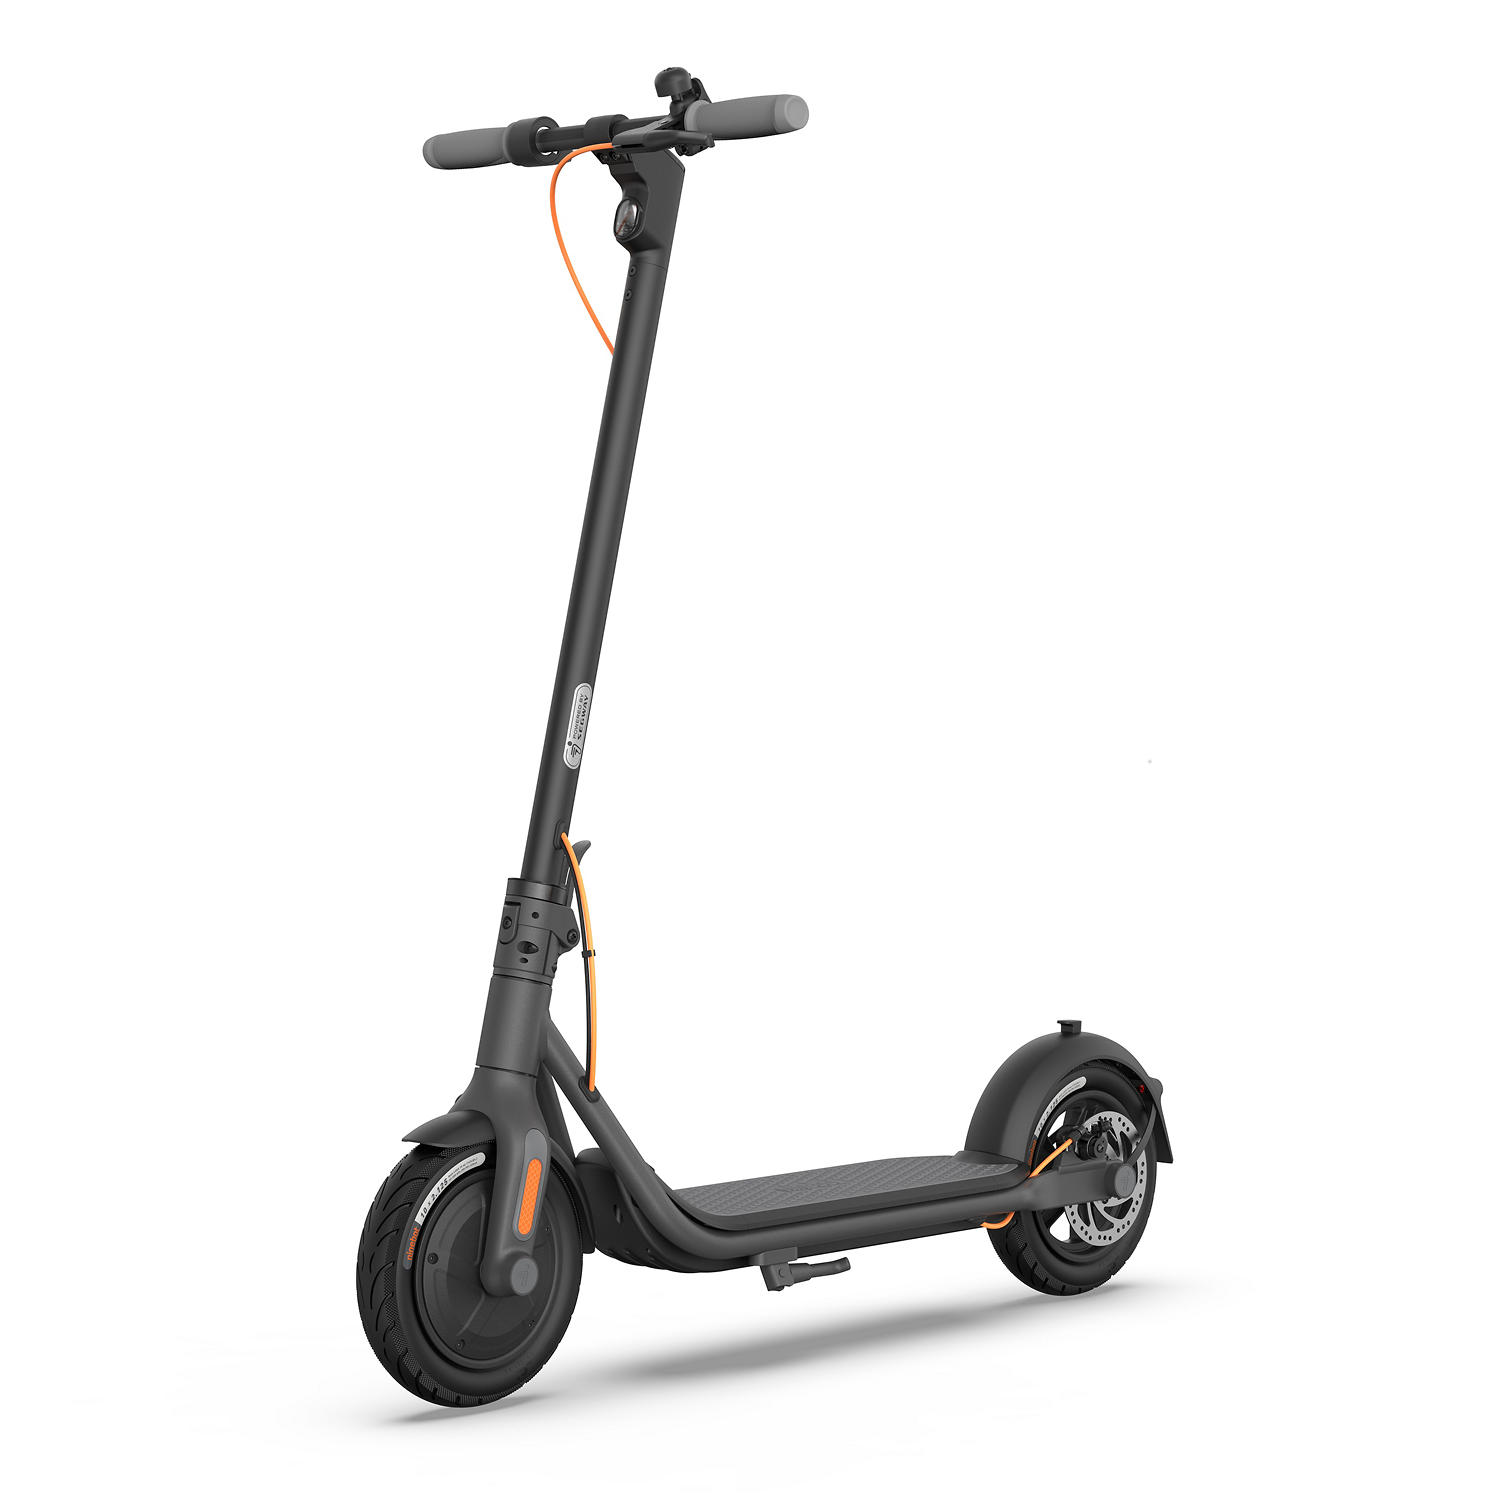 Segway Ninebot F30S Foldable and Portable Electric Kick Scooter